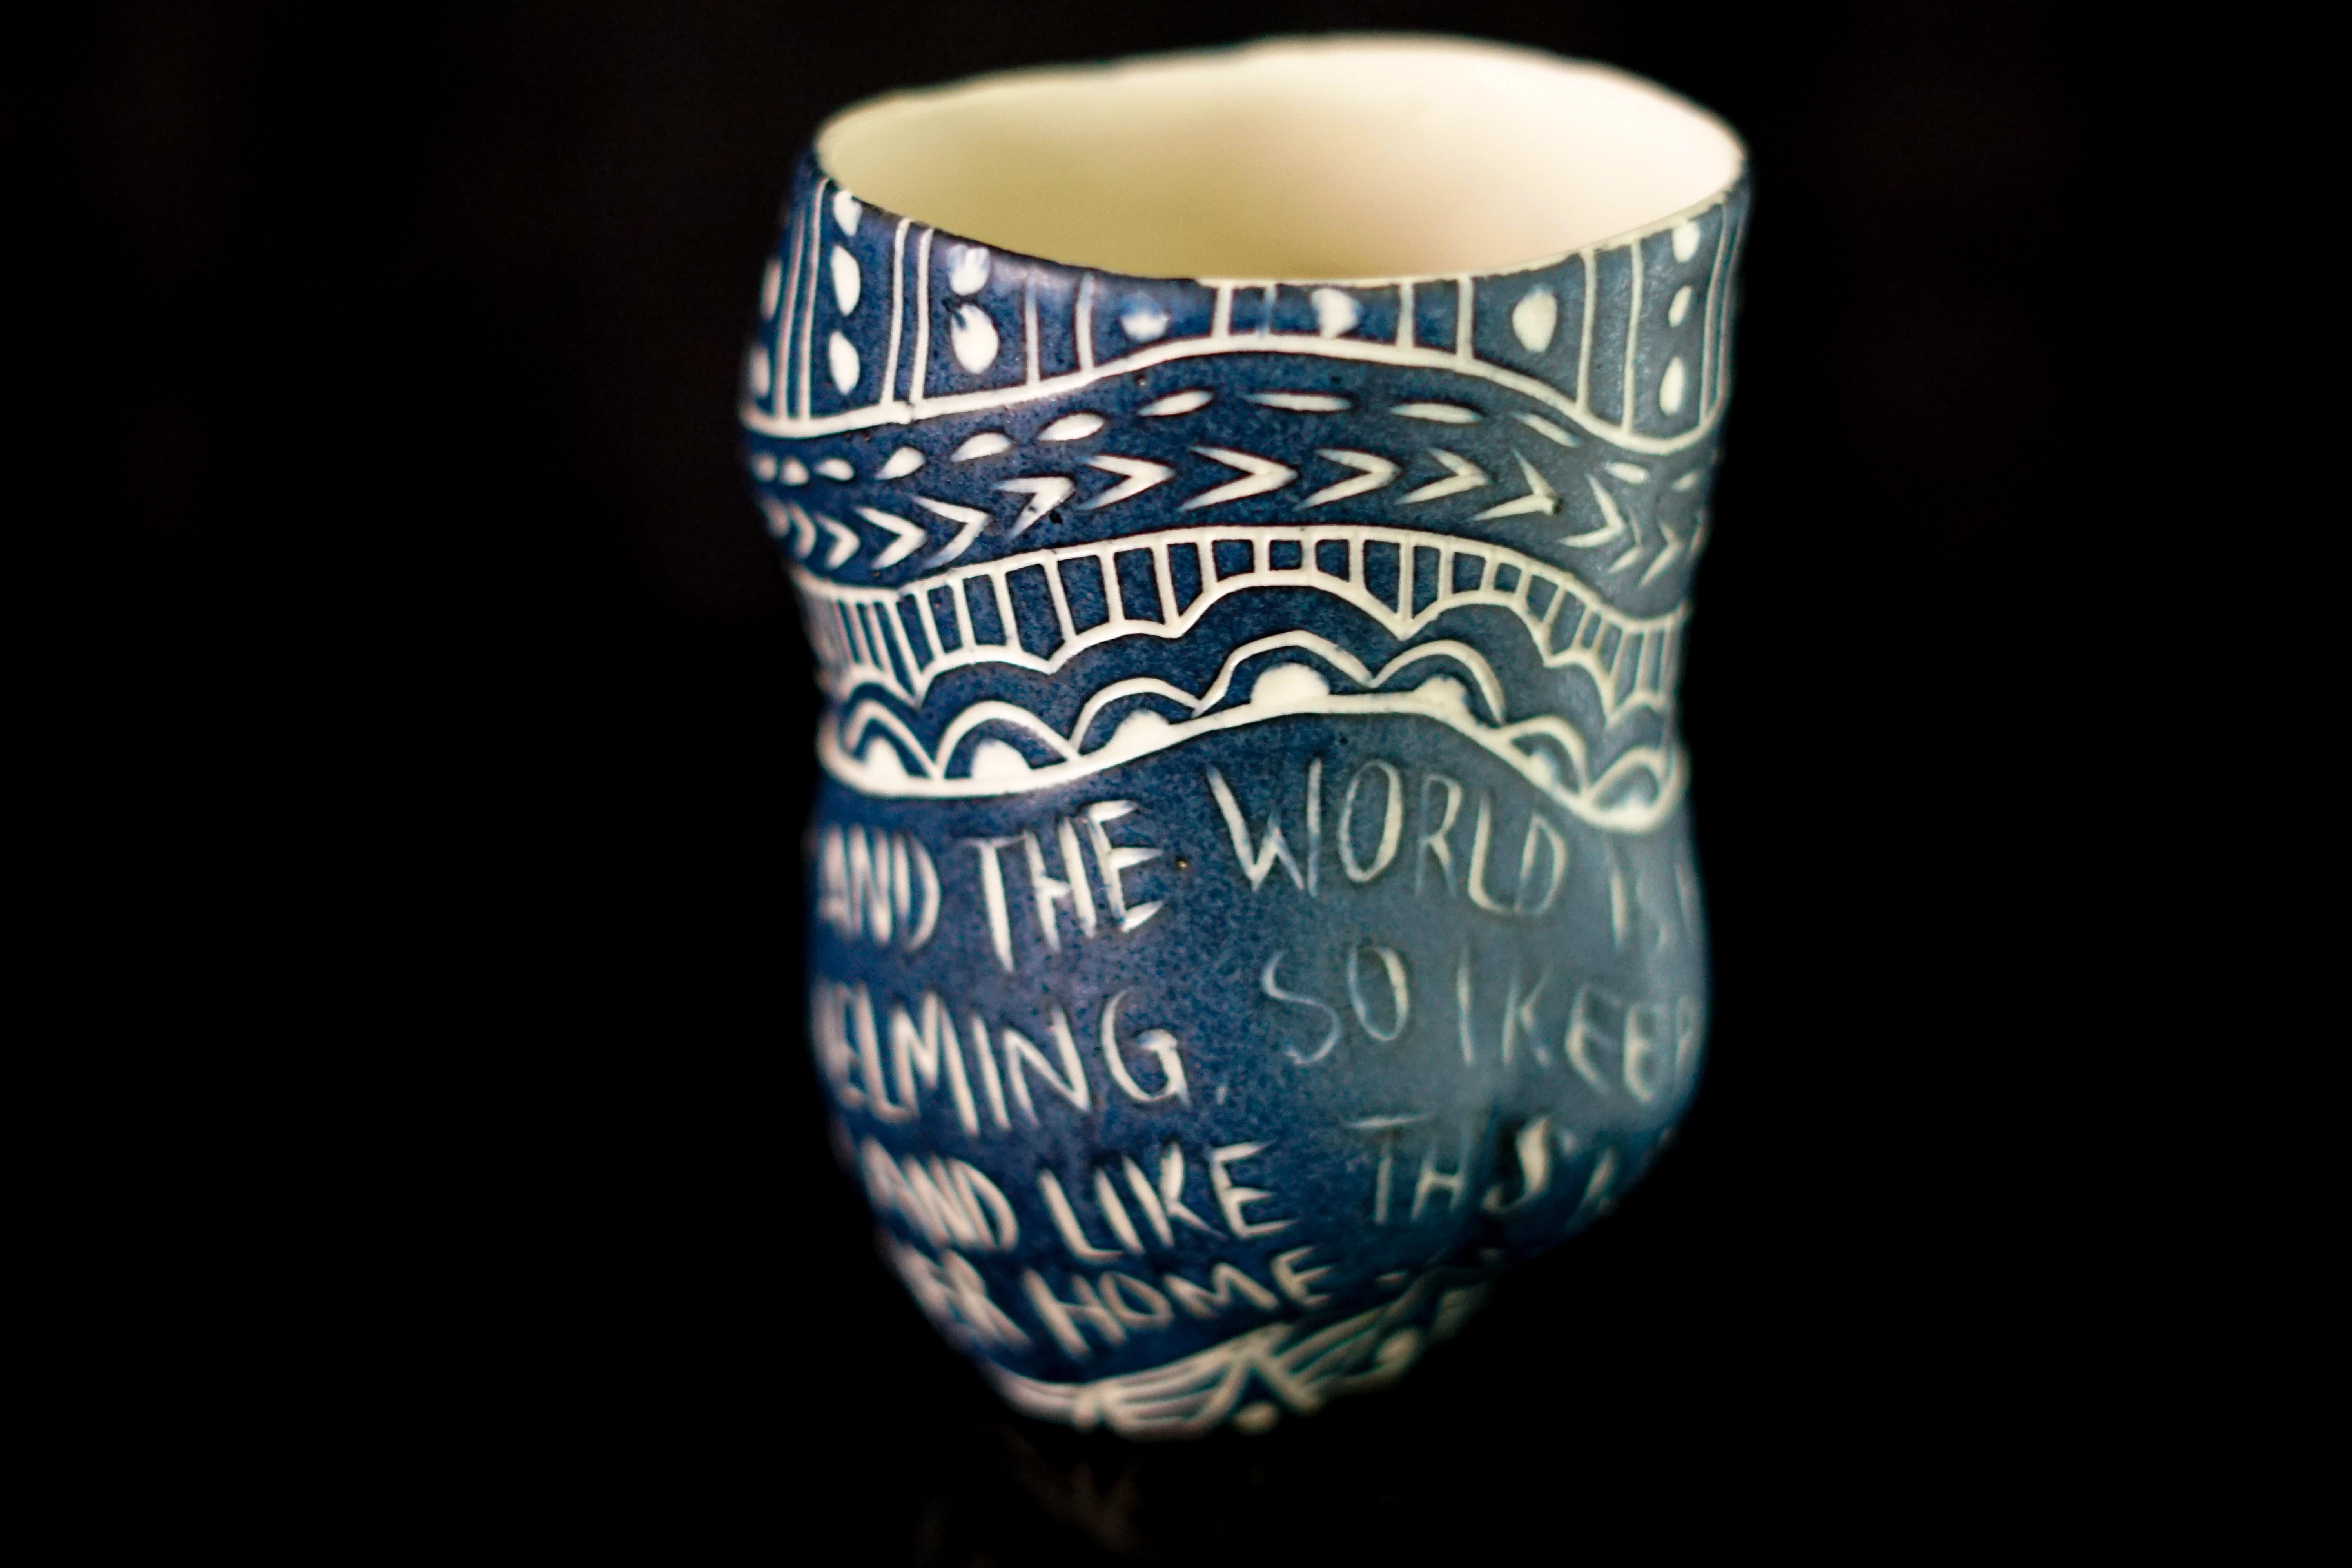 Set of 3 Handmade Porcelain Cups with Sgraffito Detailingby Alex Hodge
From the series Fragments of Our Love Story
Porcelain cup with sgraffito detailing
Overall size: 4.5 x 9 x 3 inches
Individual size: 4.5 x 3 x 3 inches

1. “When the door